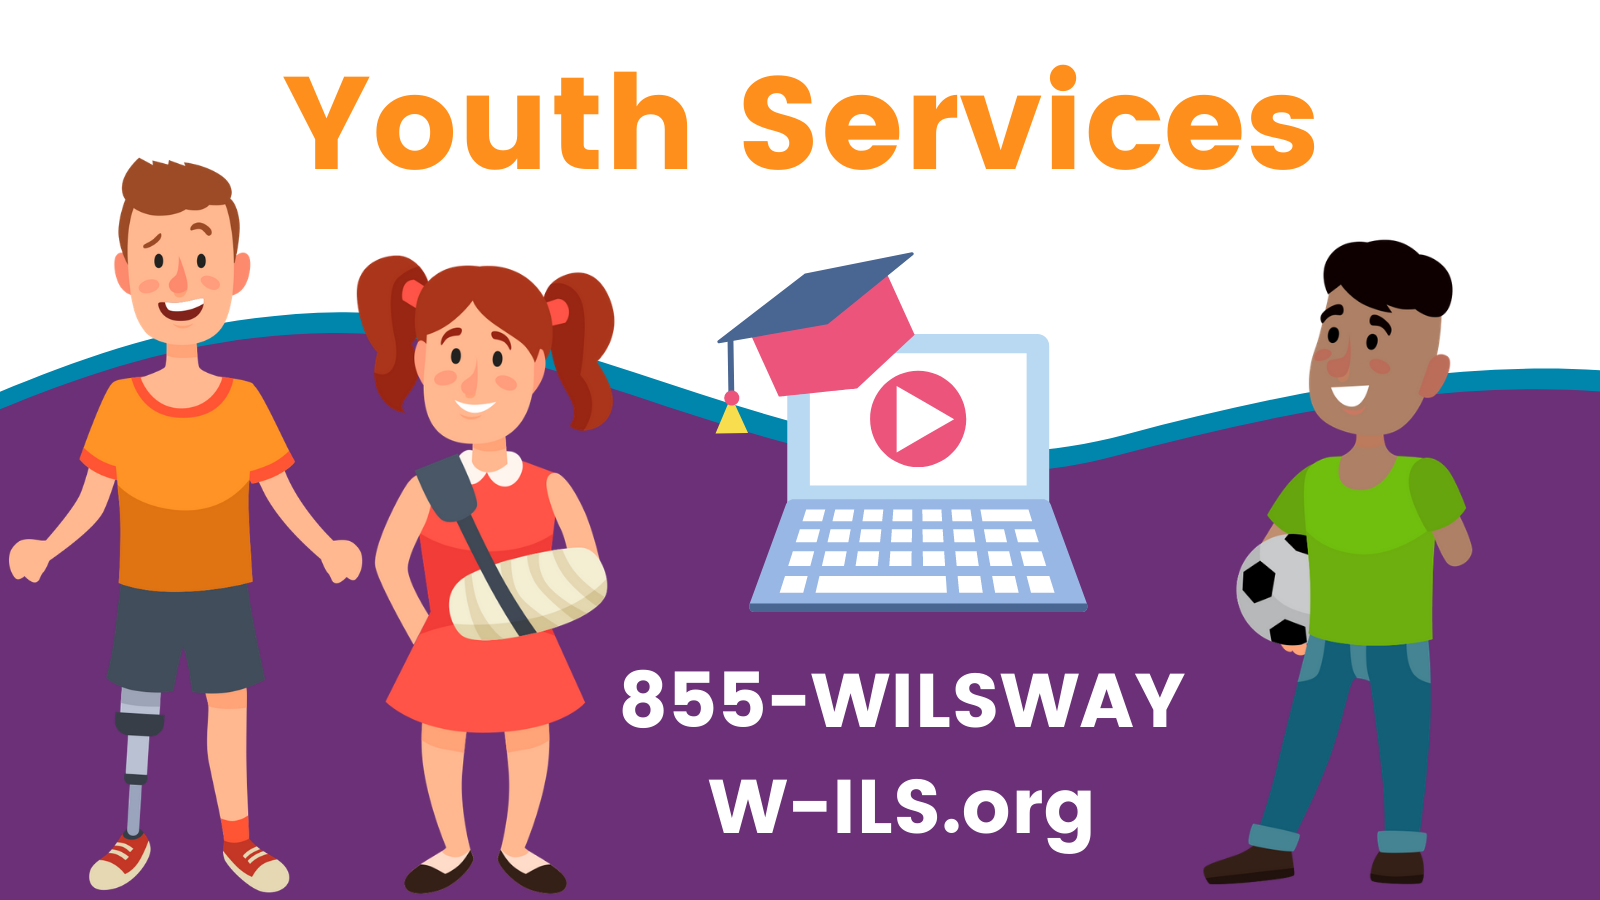 To learn more about Youth Services, call 855-WILSWAY or visit W-ILS.org